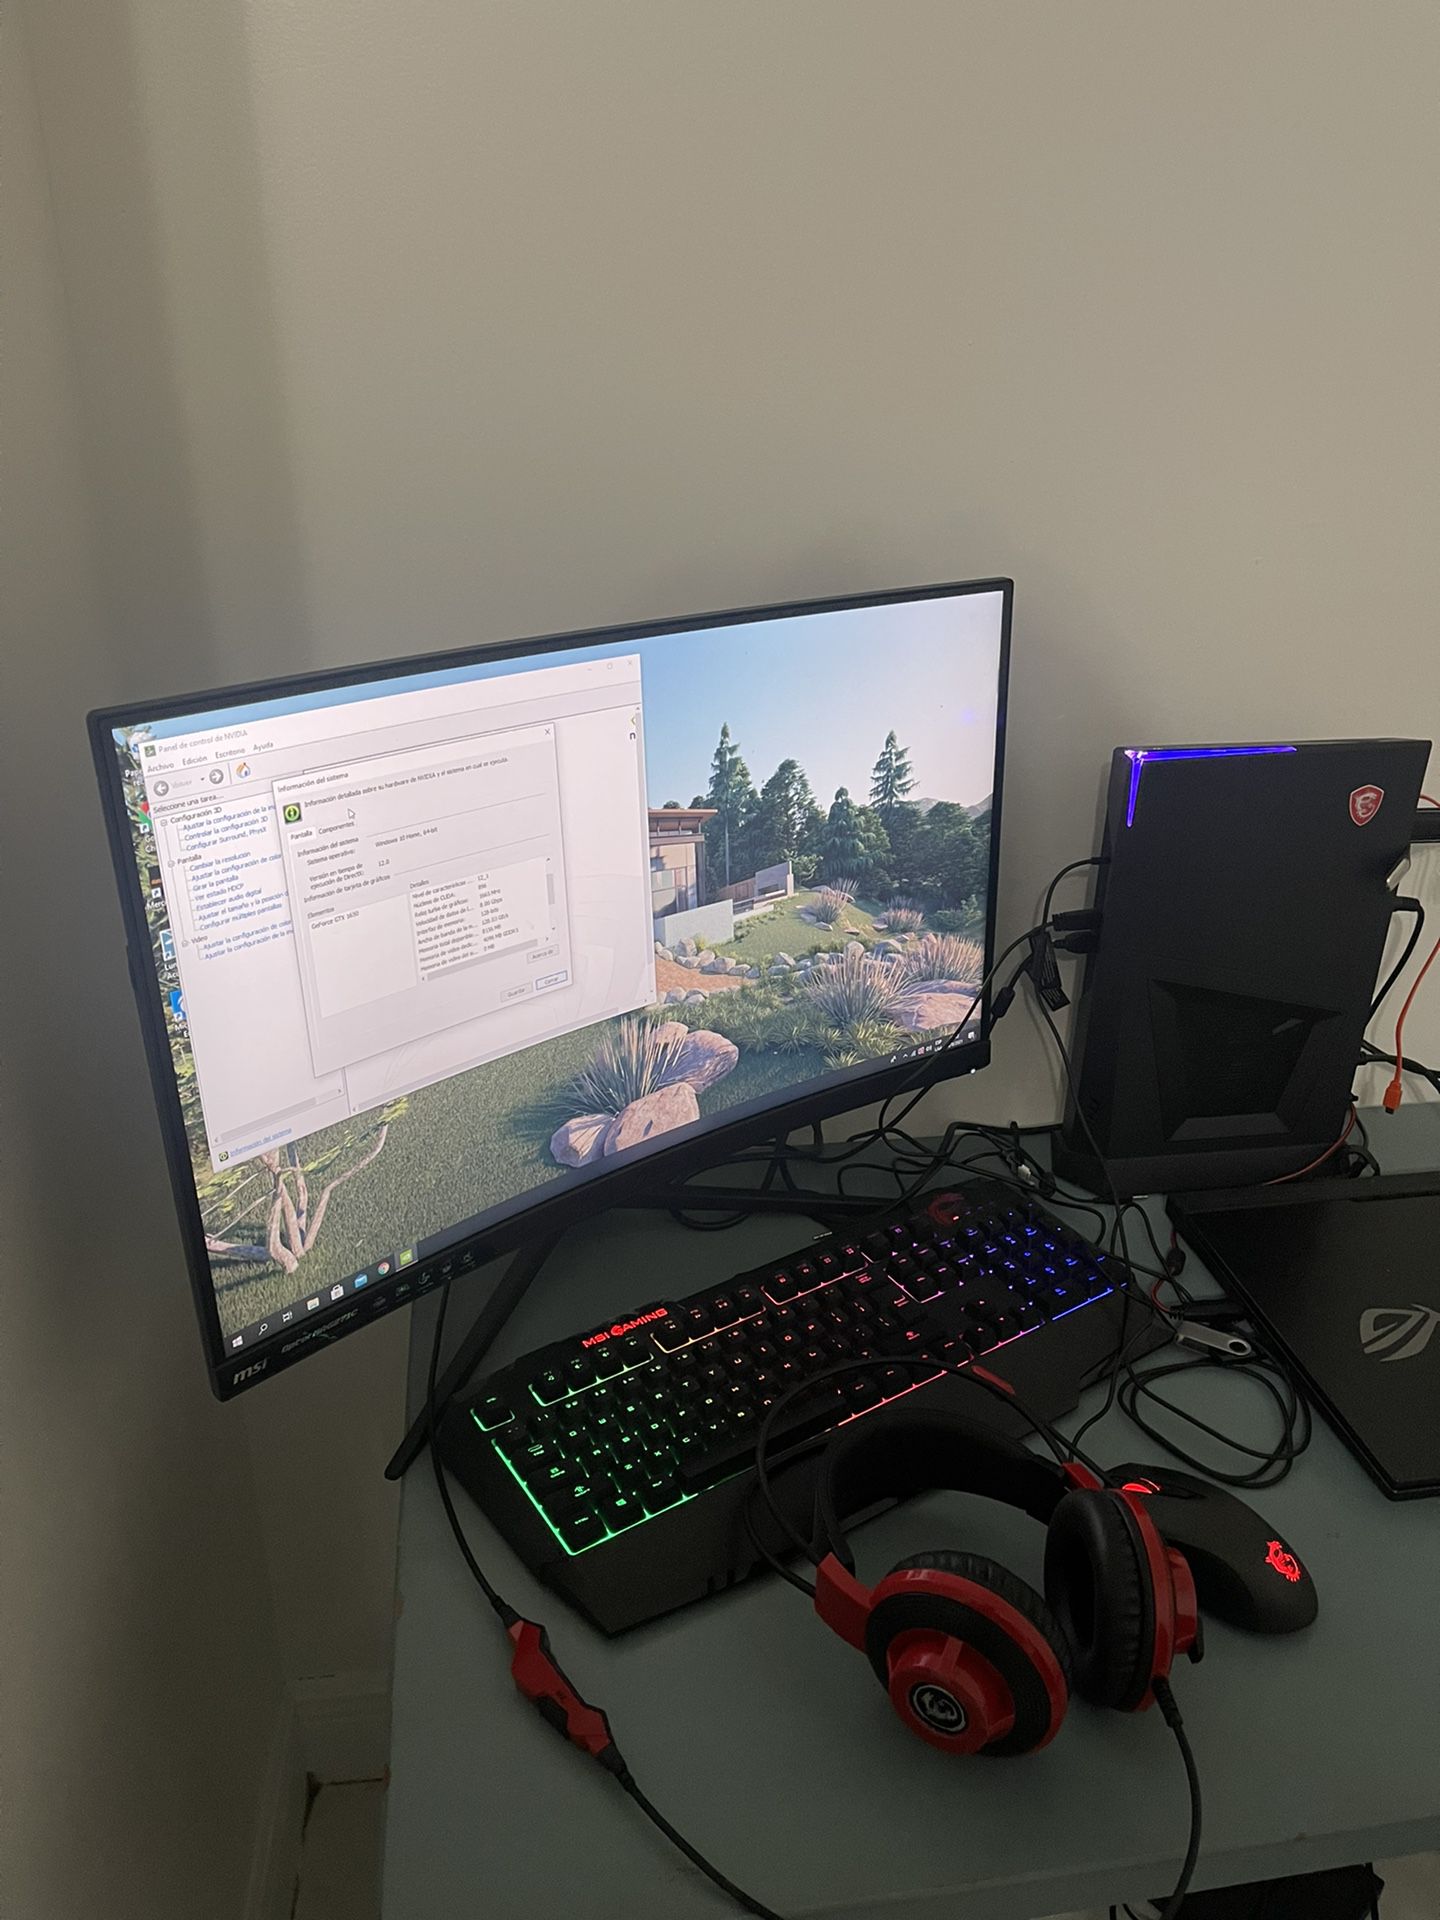 MSI Gaming Desktop With 24” Curve Monitor